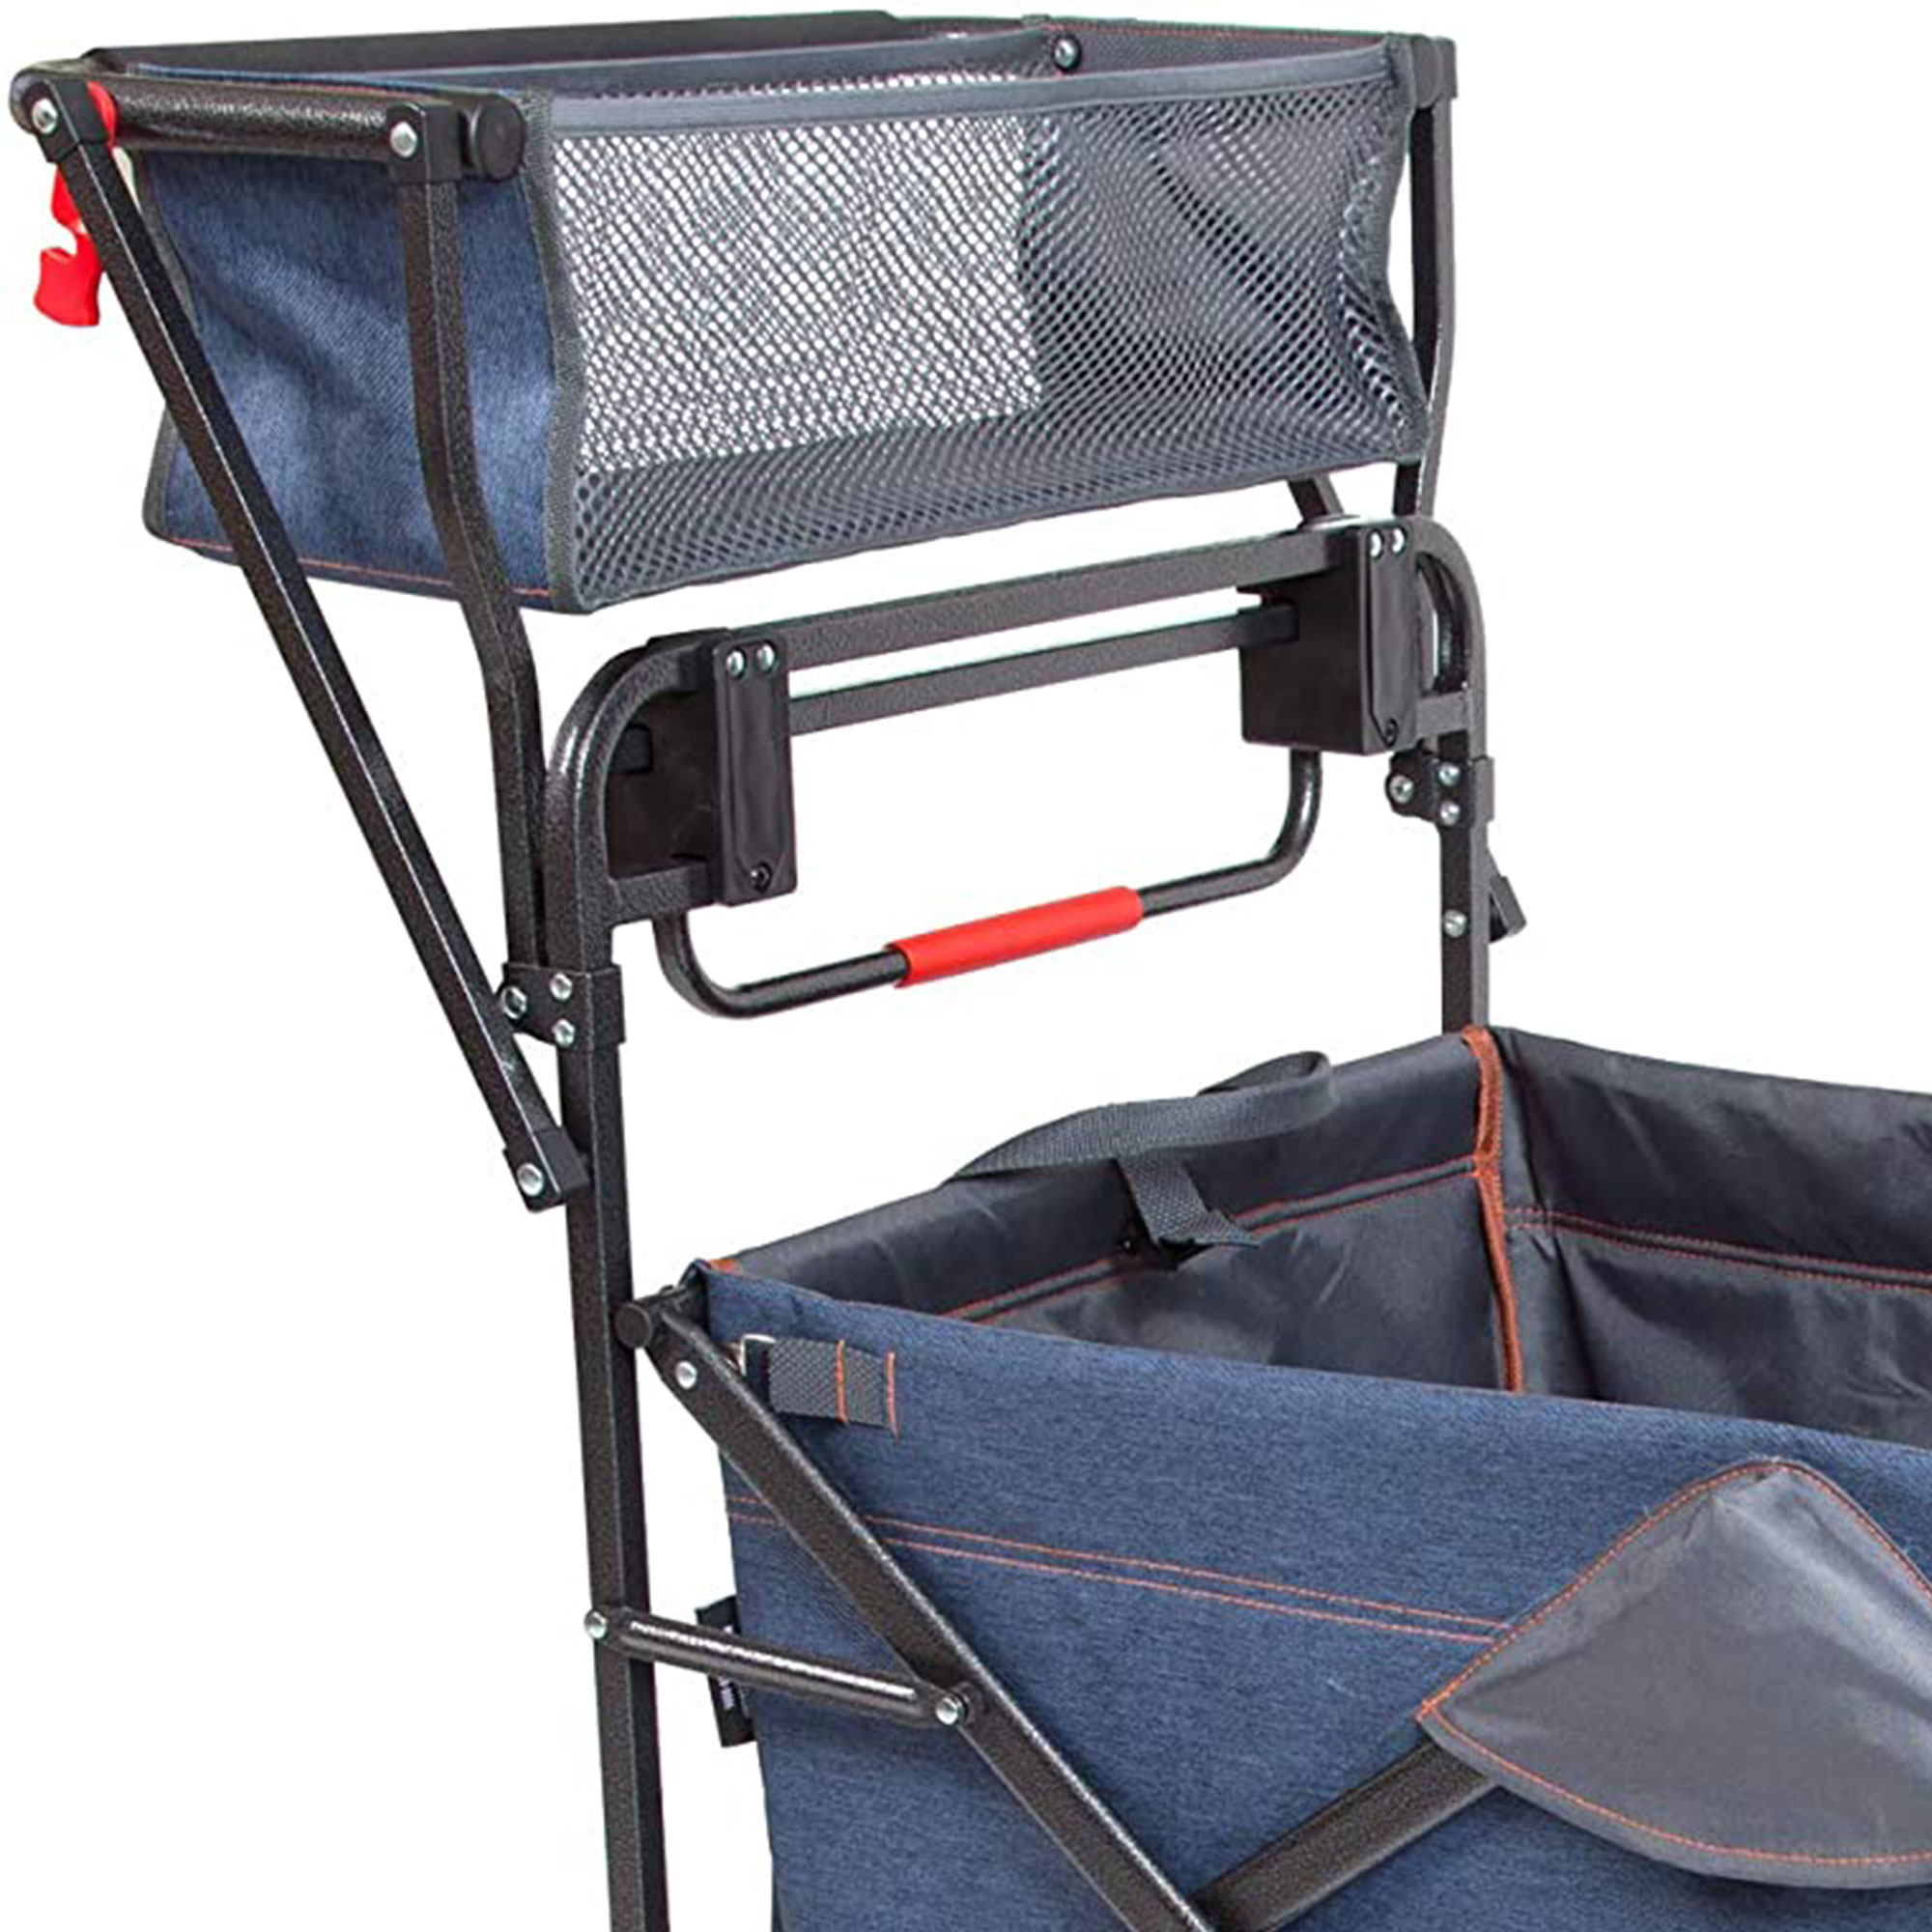 Mac Sports Collapsible Heavy Duty Push Pull Utility Cart Wagon, Blue - image 5 of 9